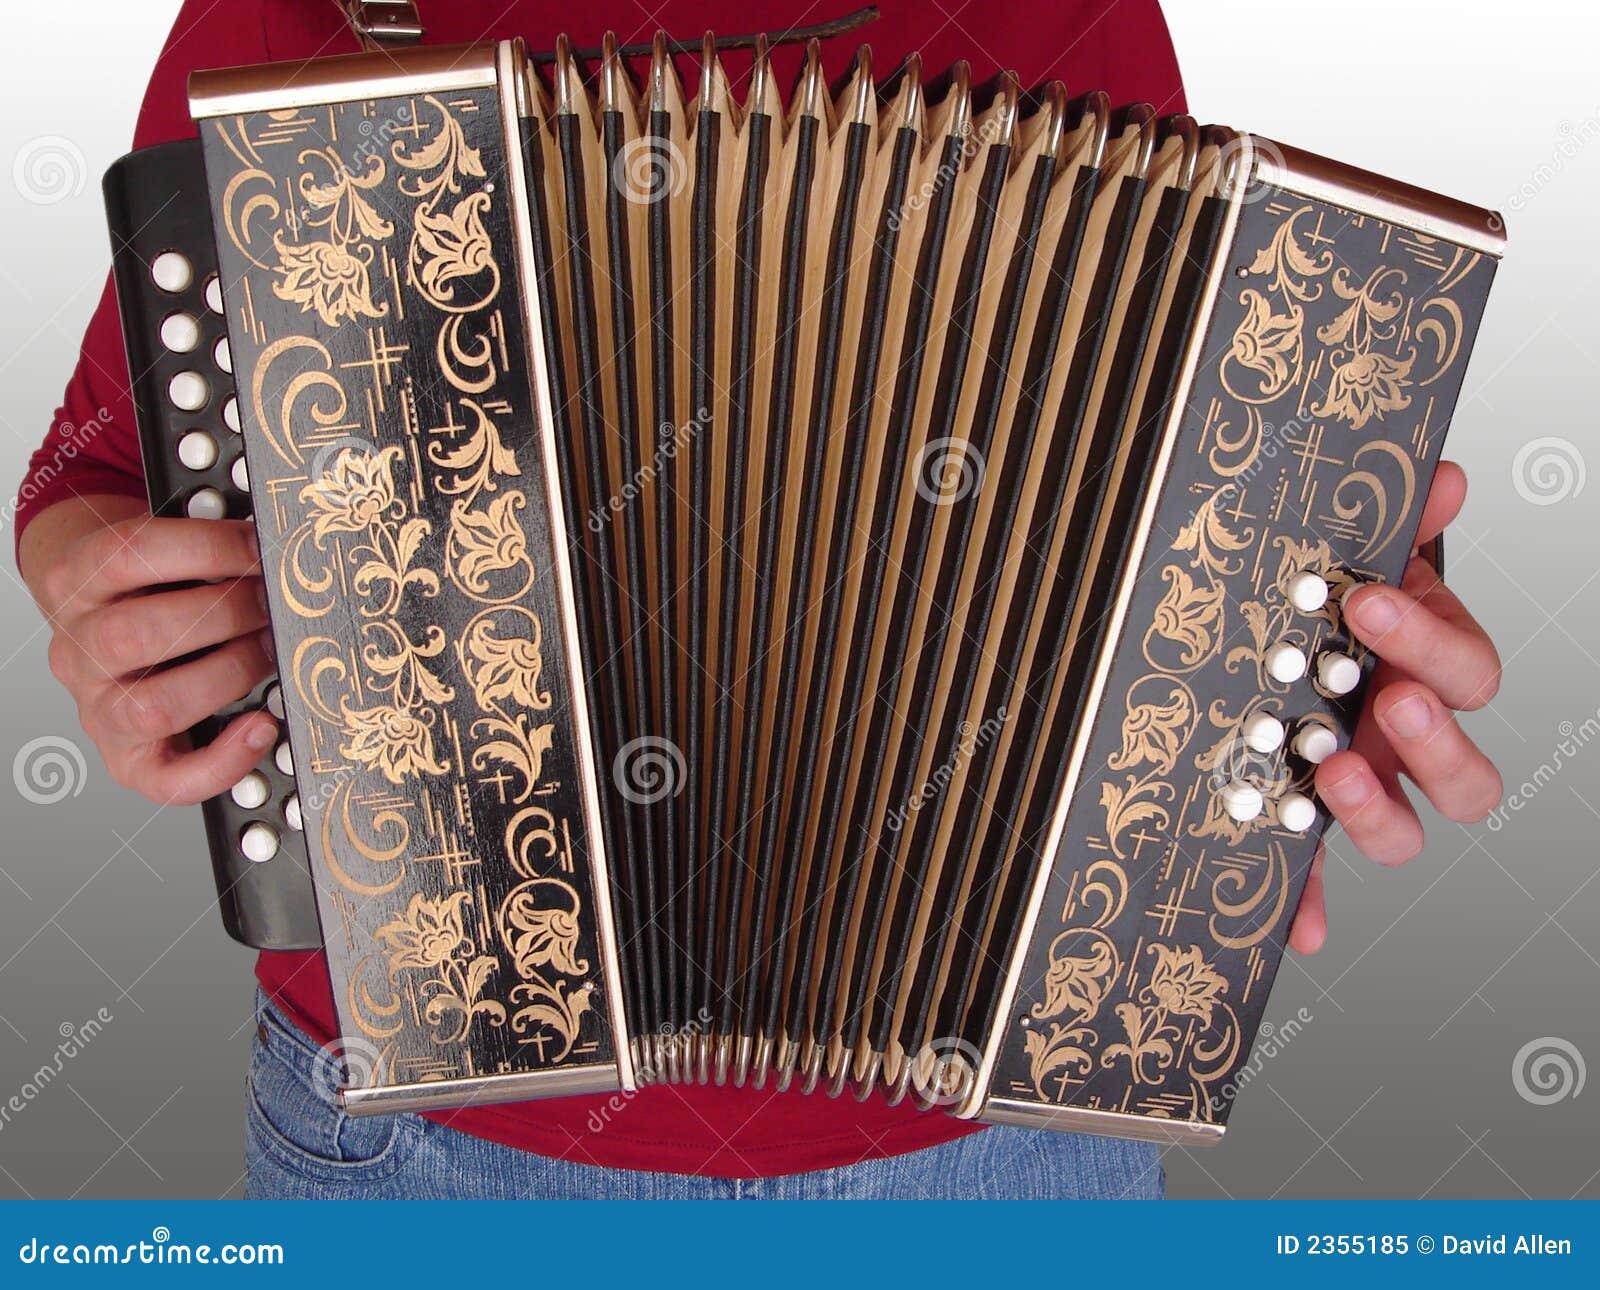 Playing the accordion stock image. Image of buttons, playing - 2355185